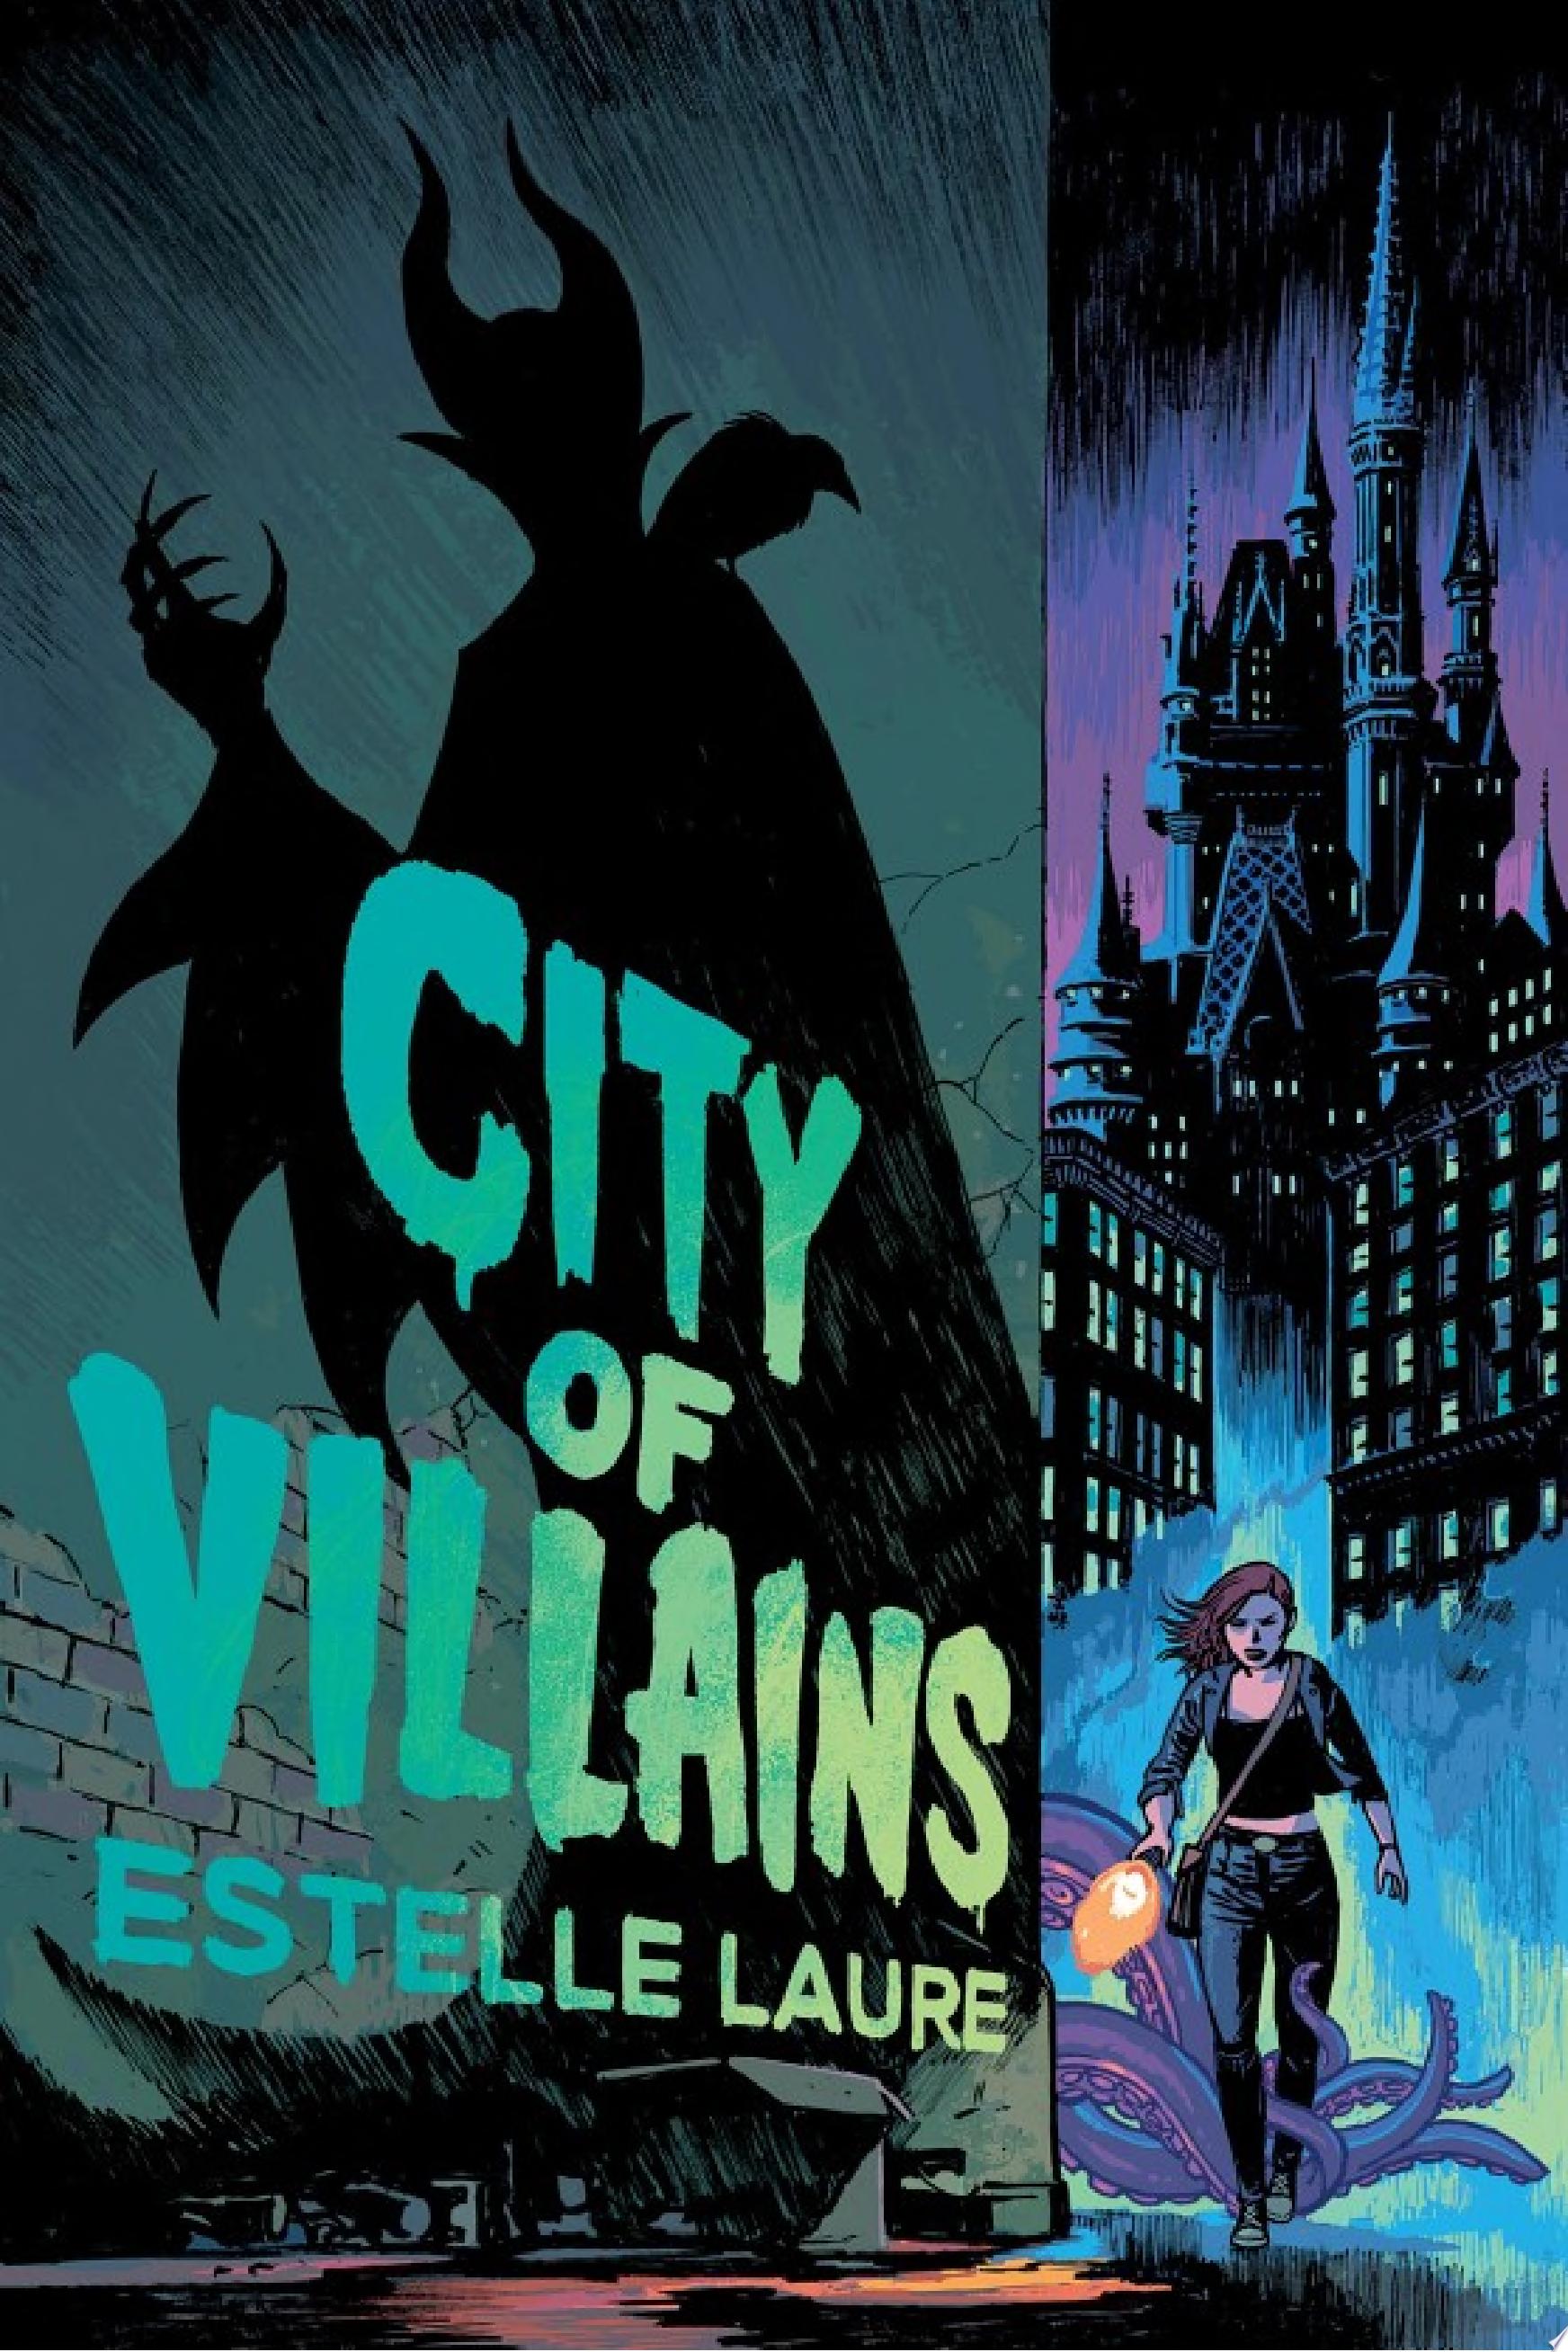 Image for "City of Villains Book 1 (Volume 1)"